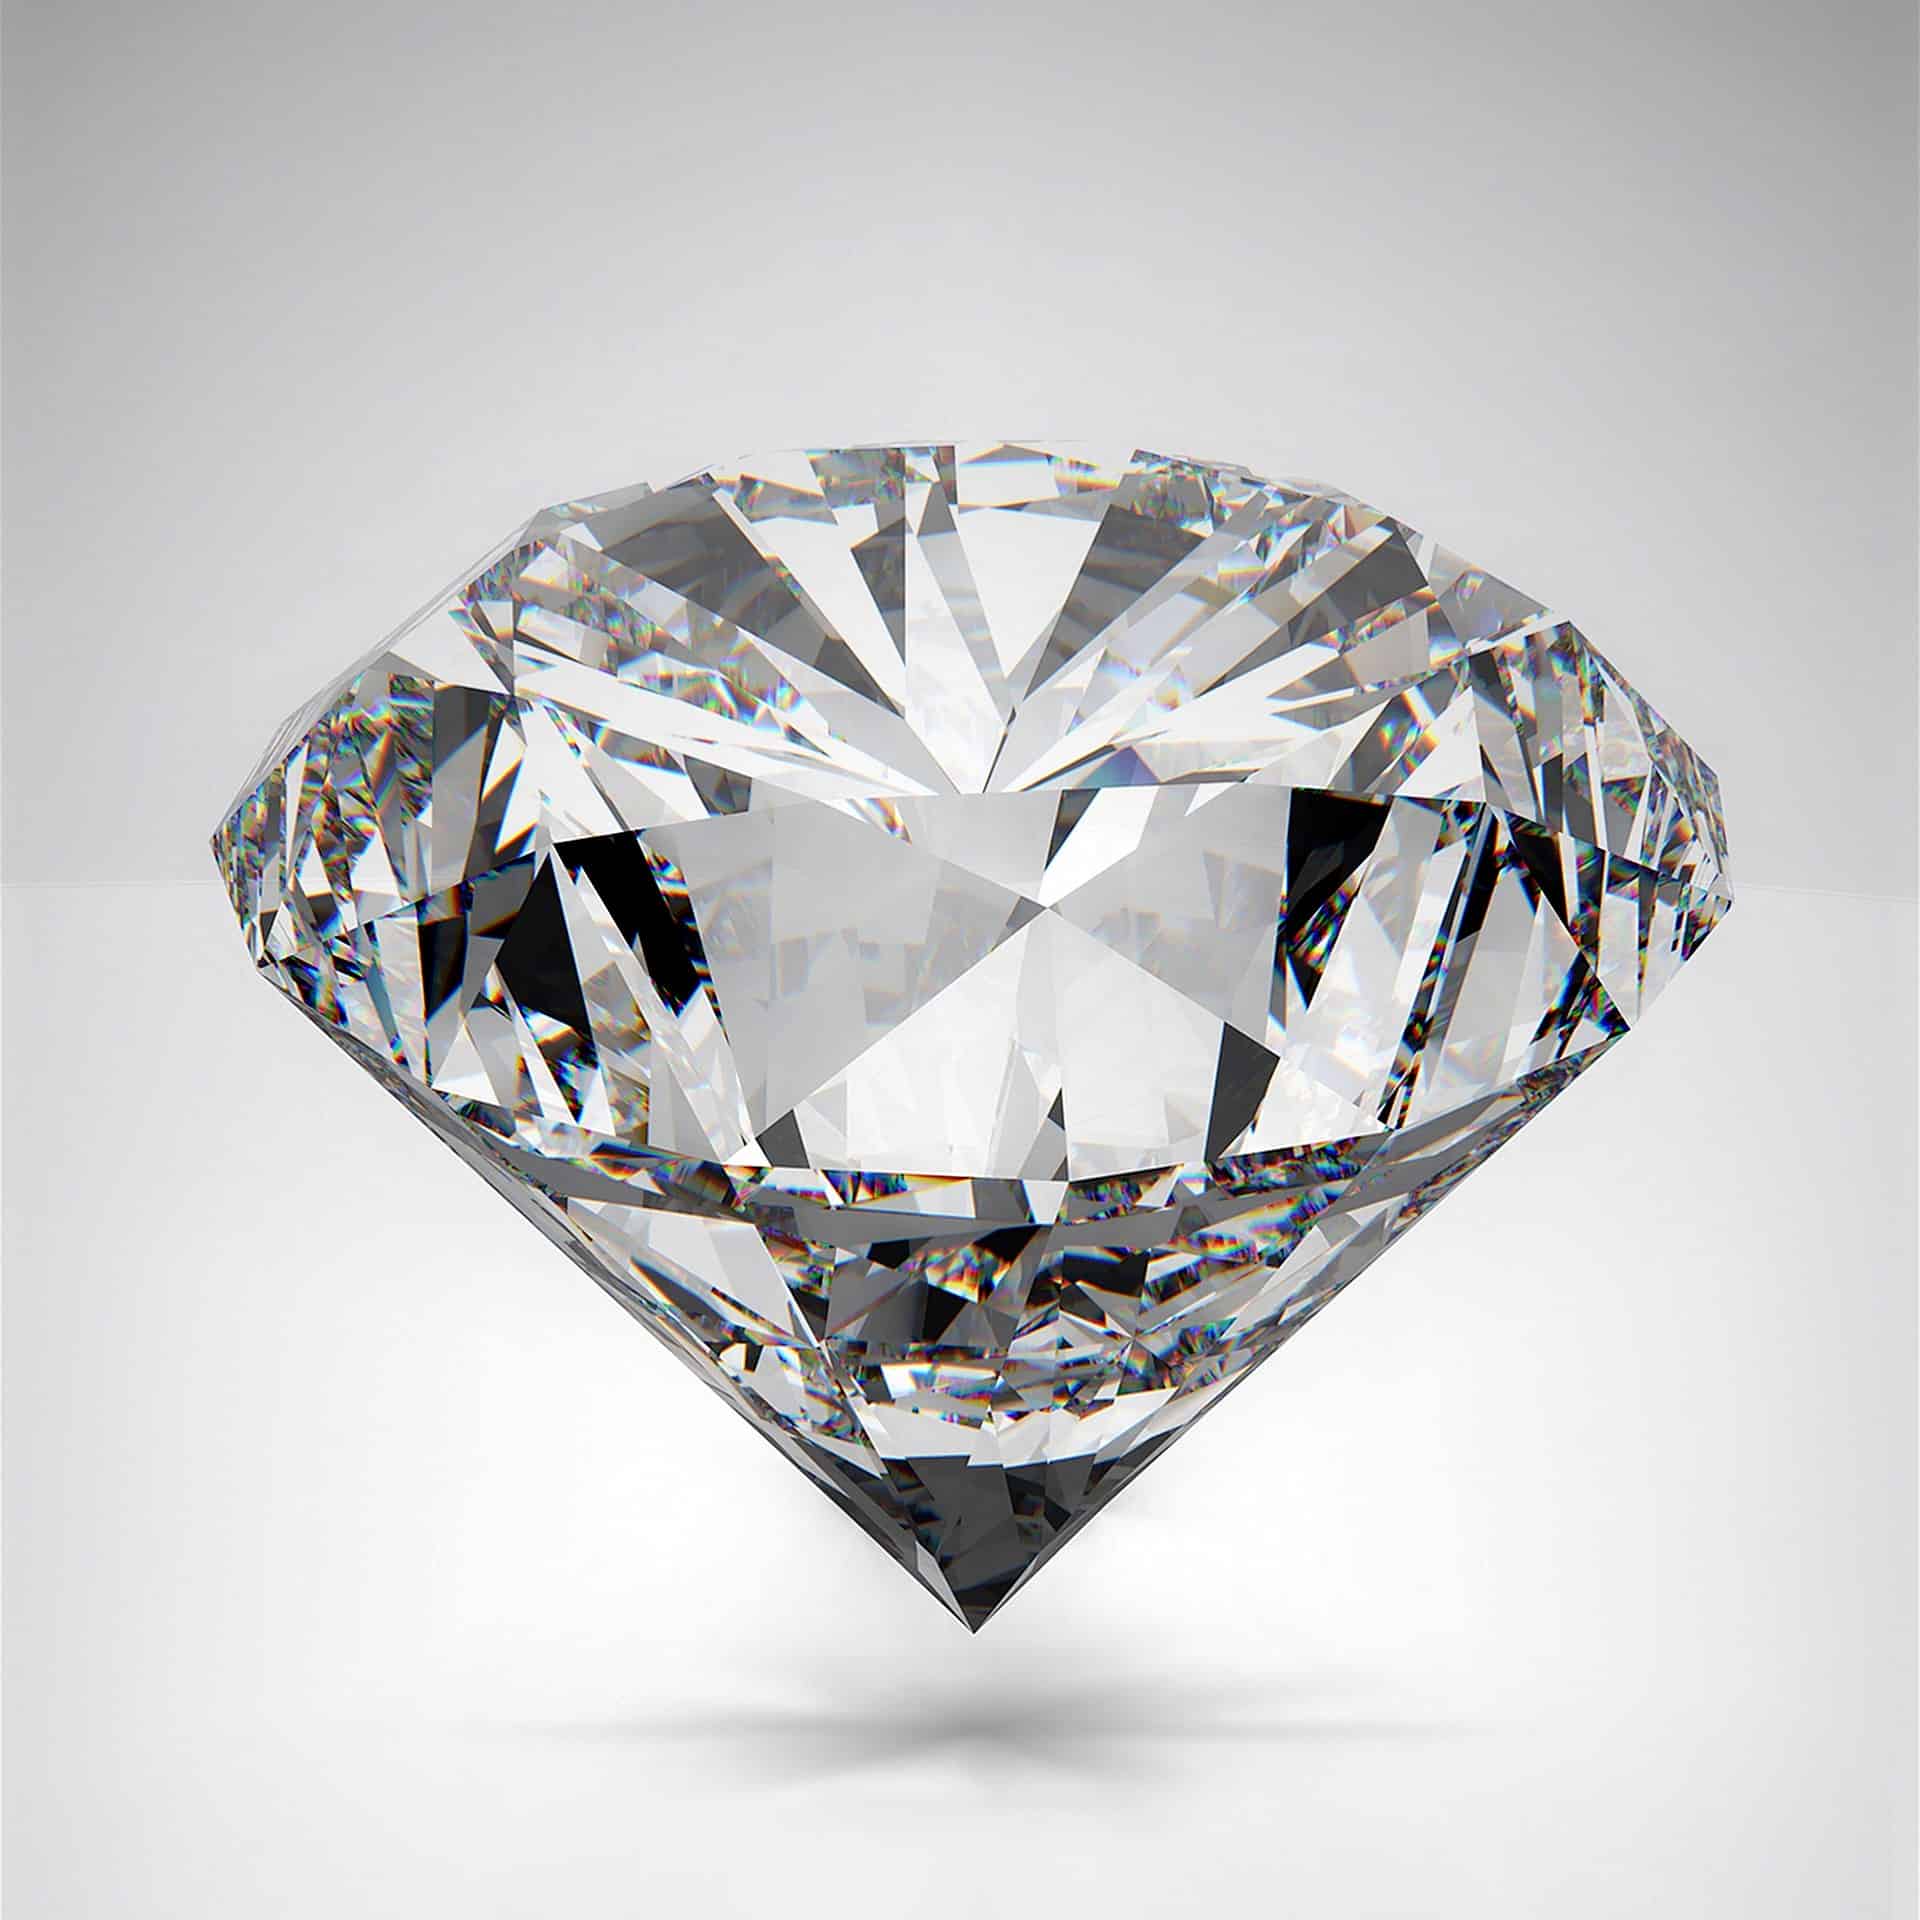 Diamond facts for successful resale